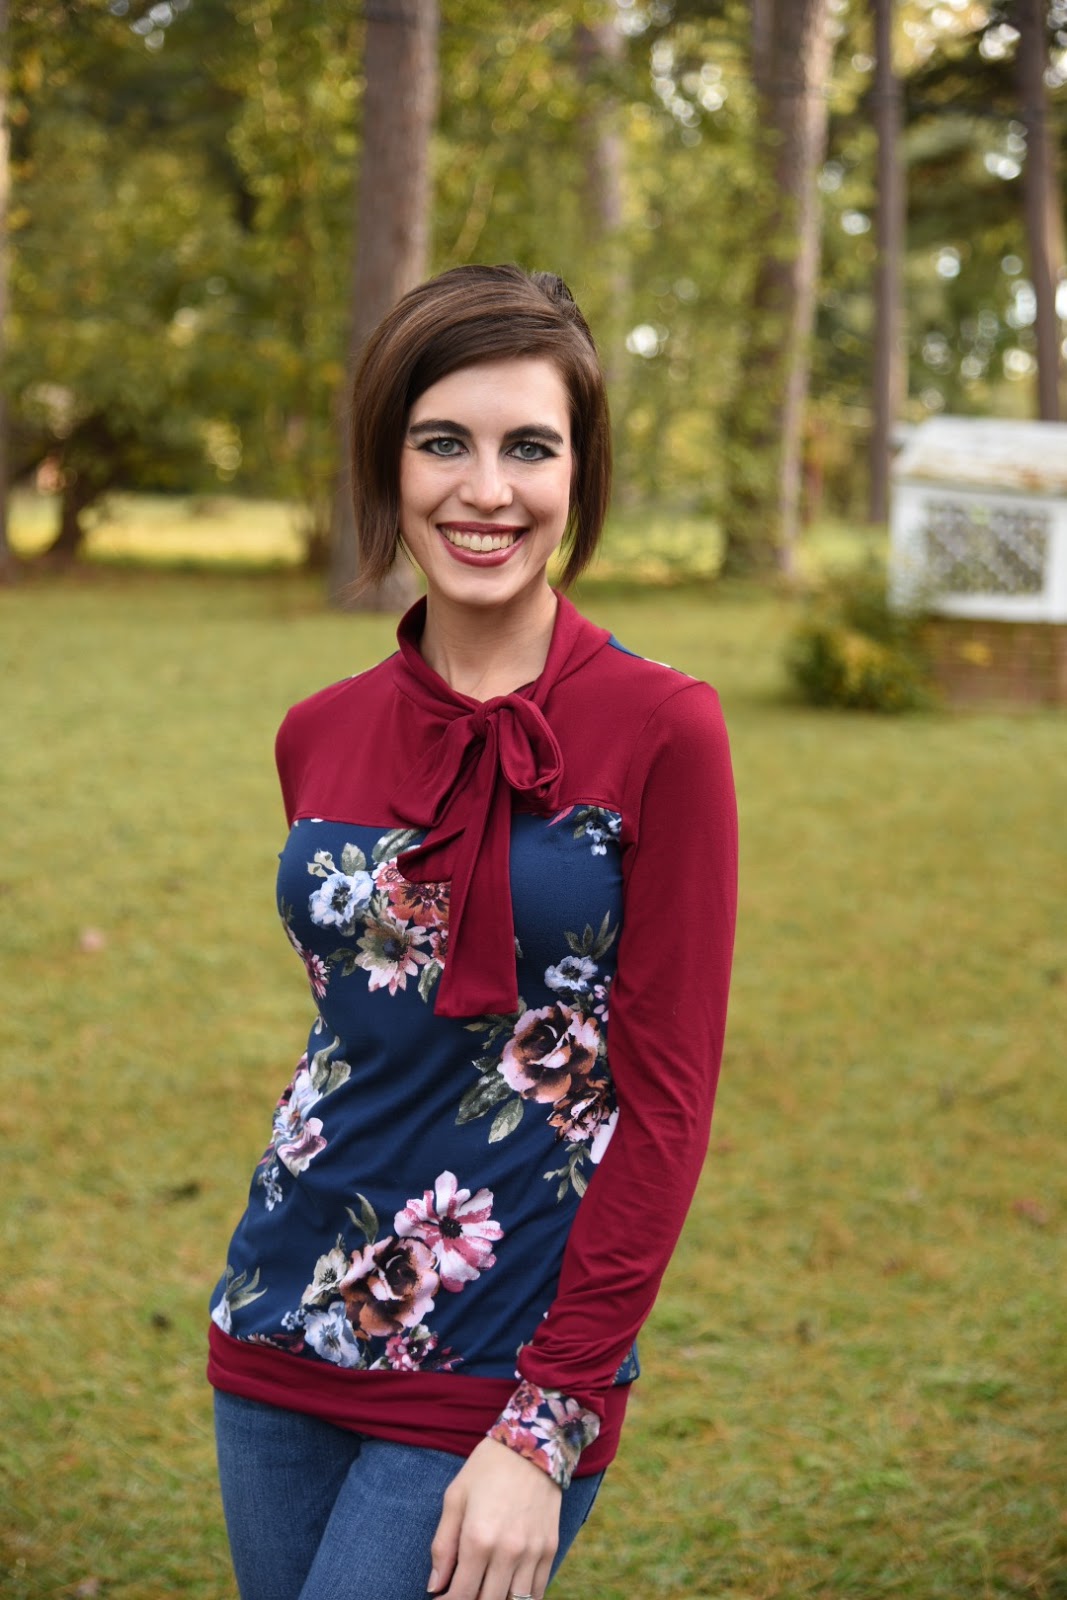 Fabulous and FREE! The Neck Tie Top by Winter Wear Designs